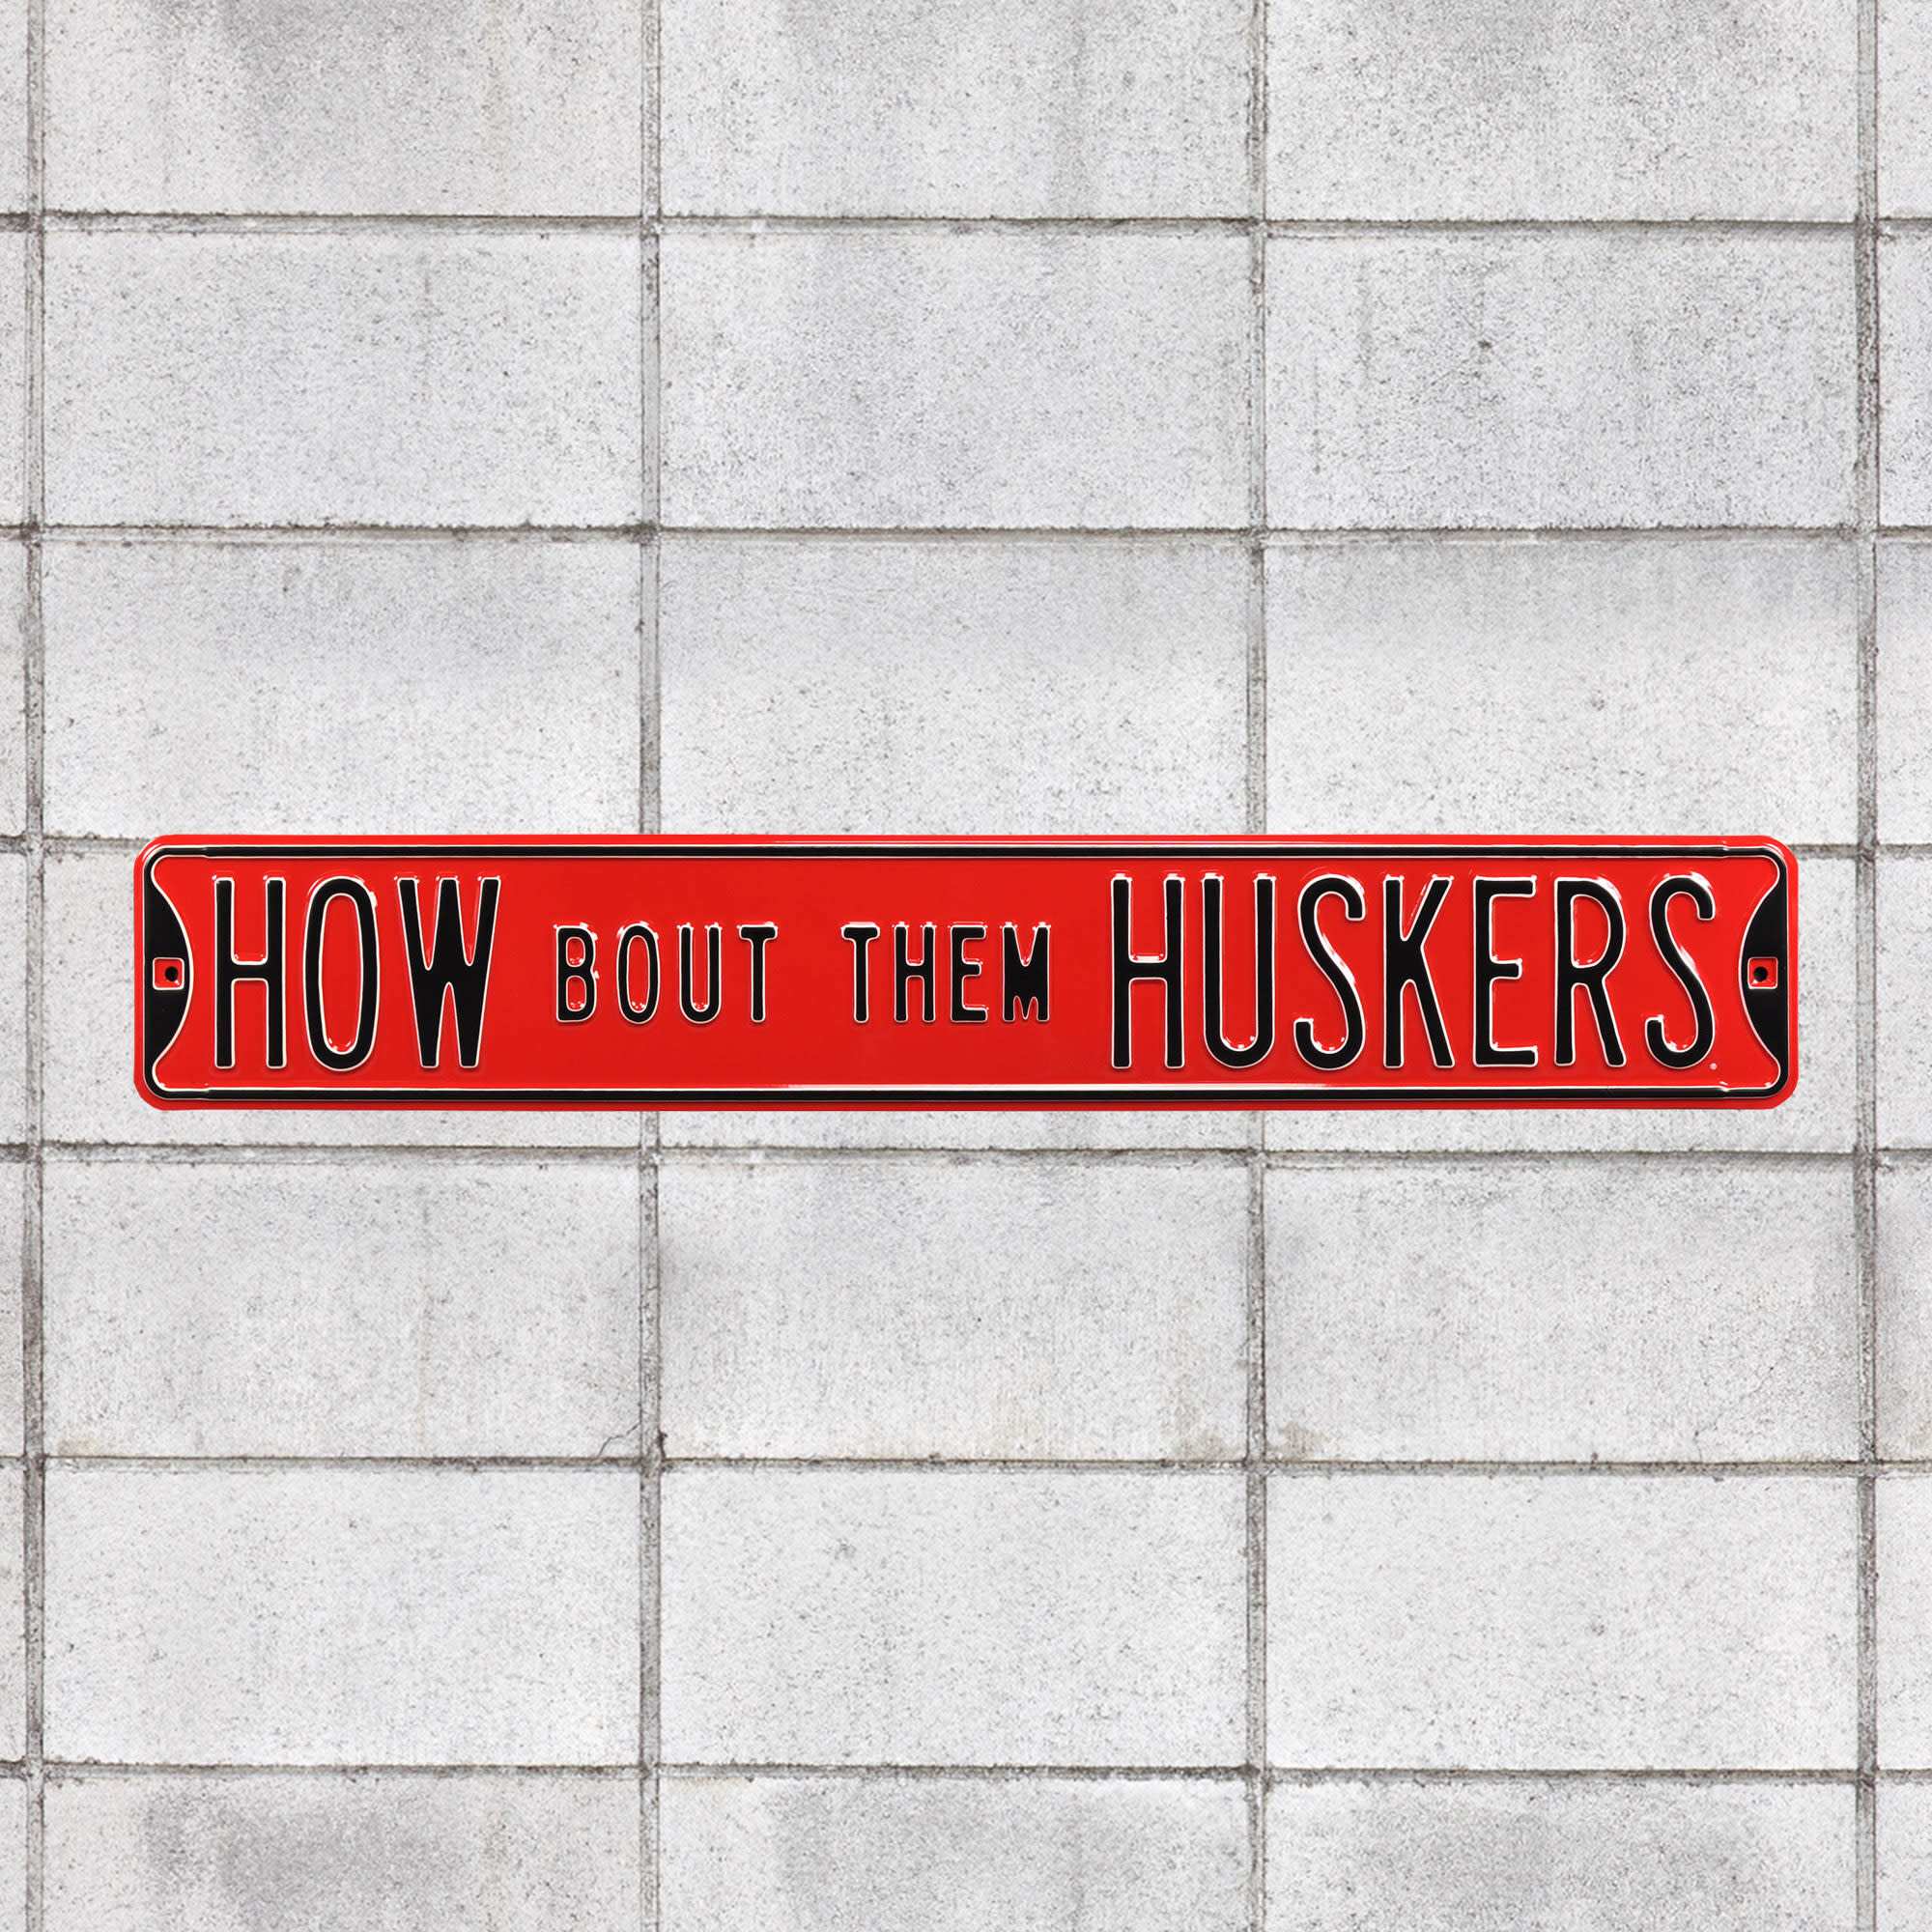 Nebraska Cornhuskers: How Bout Them Huskers - Officially Licensed Metal Street Sign 36.0"W x 6.0"H by Fathead | 100% Steel